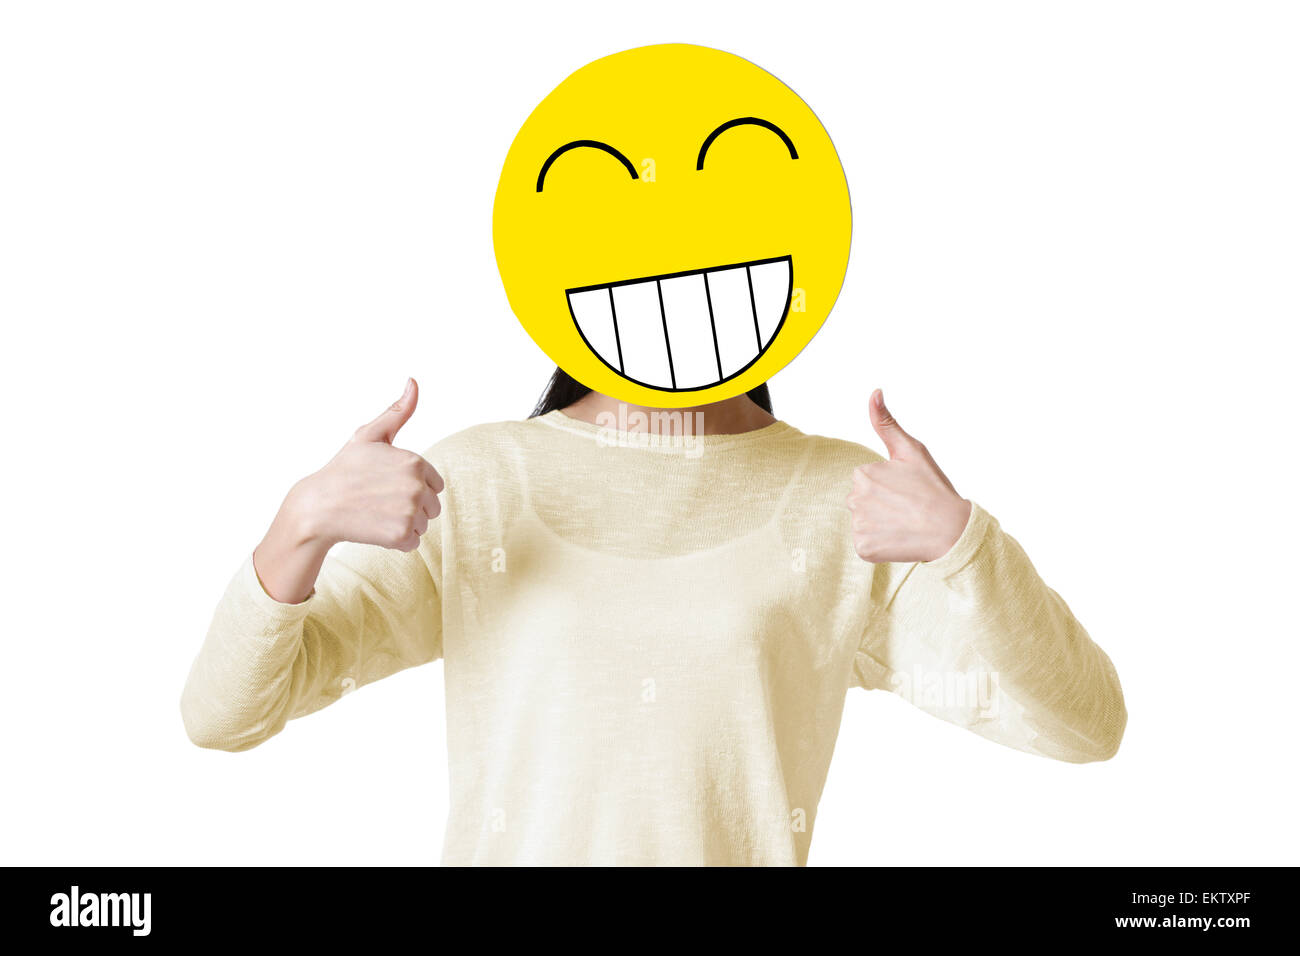 Page 3 Thumbs Up Emoji High Resolution Stock Photography And Images Alamy